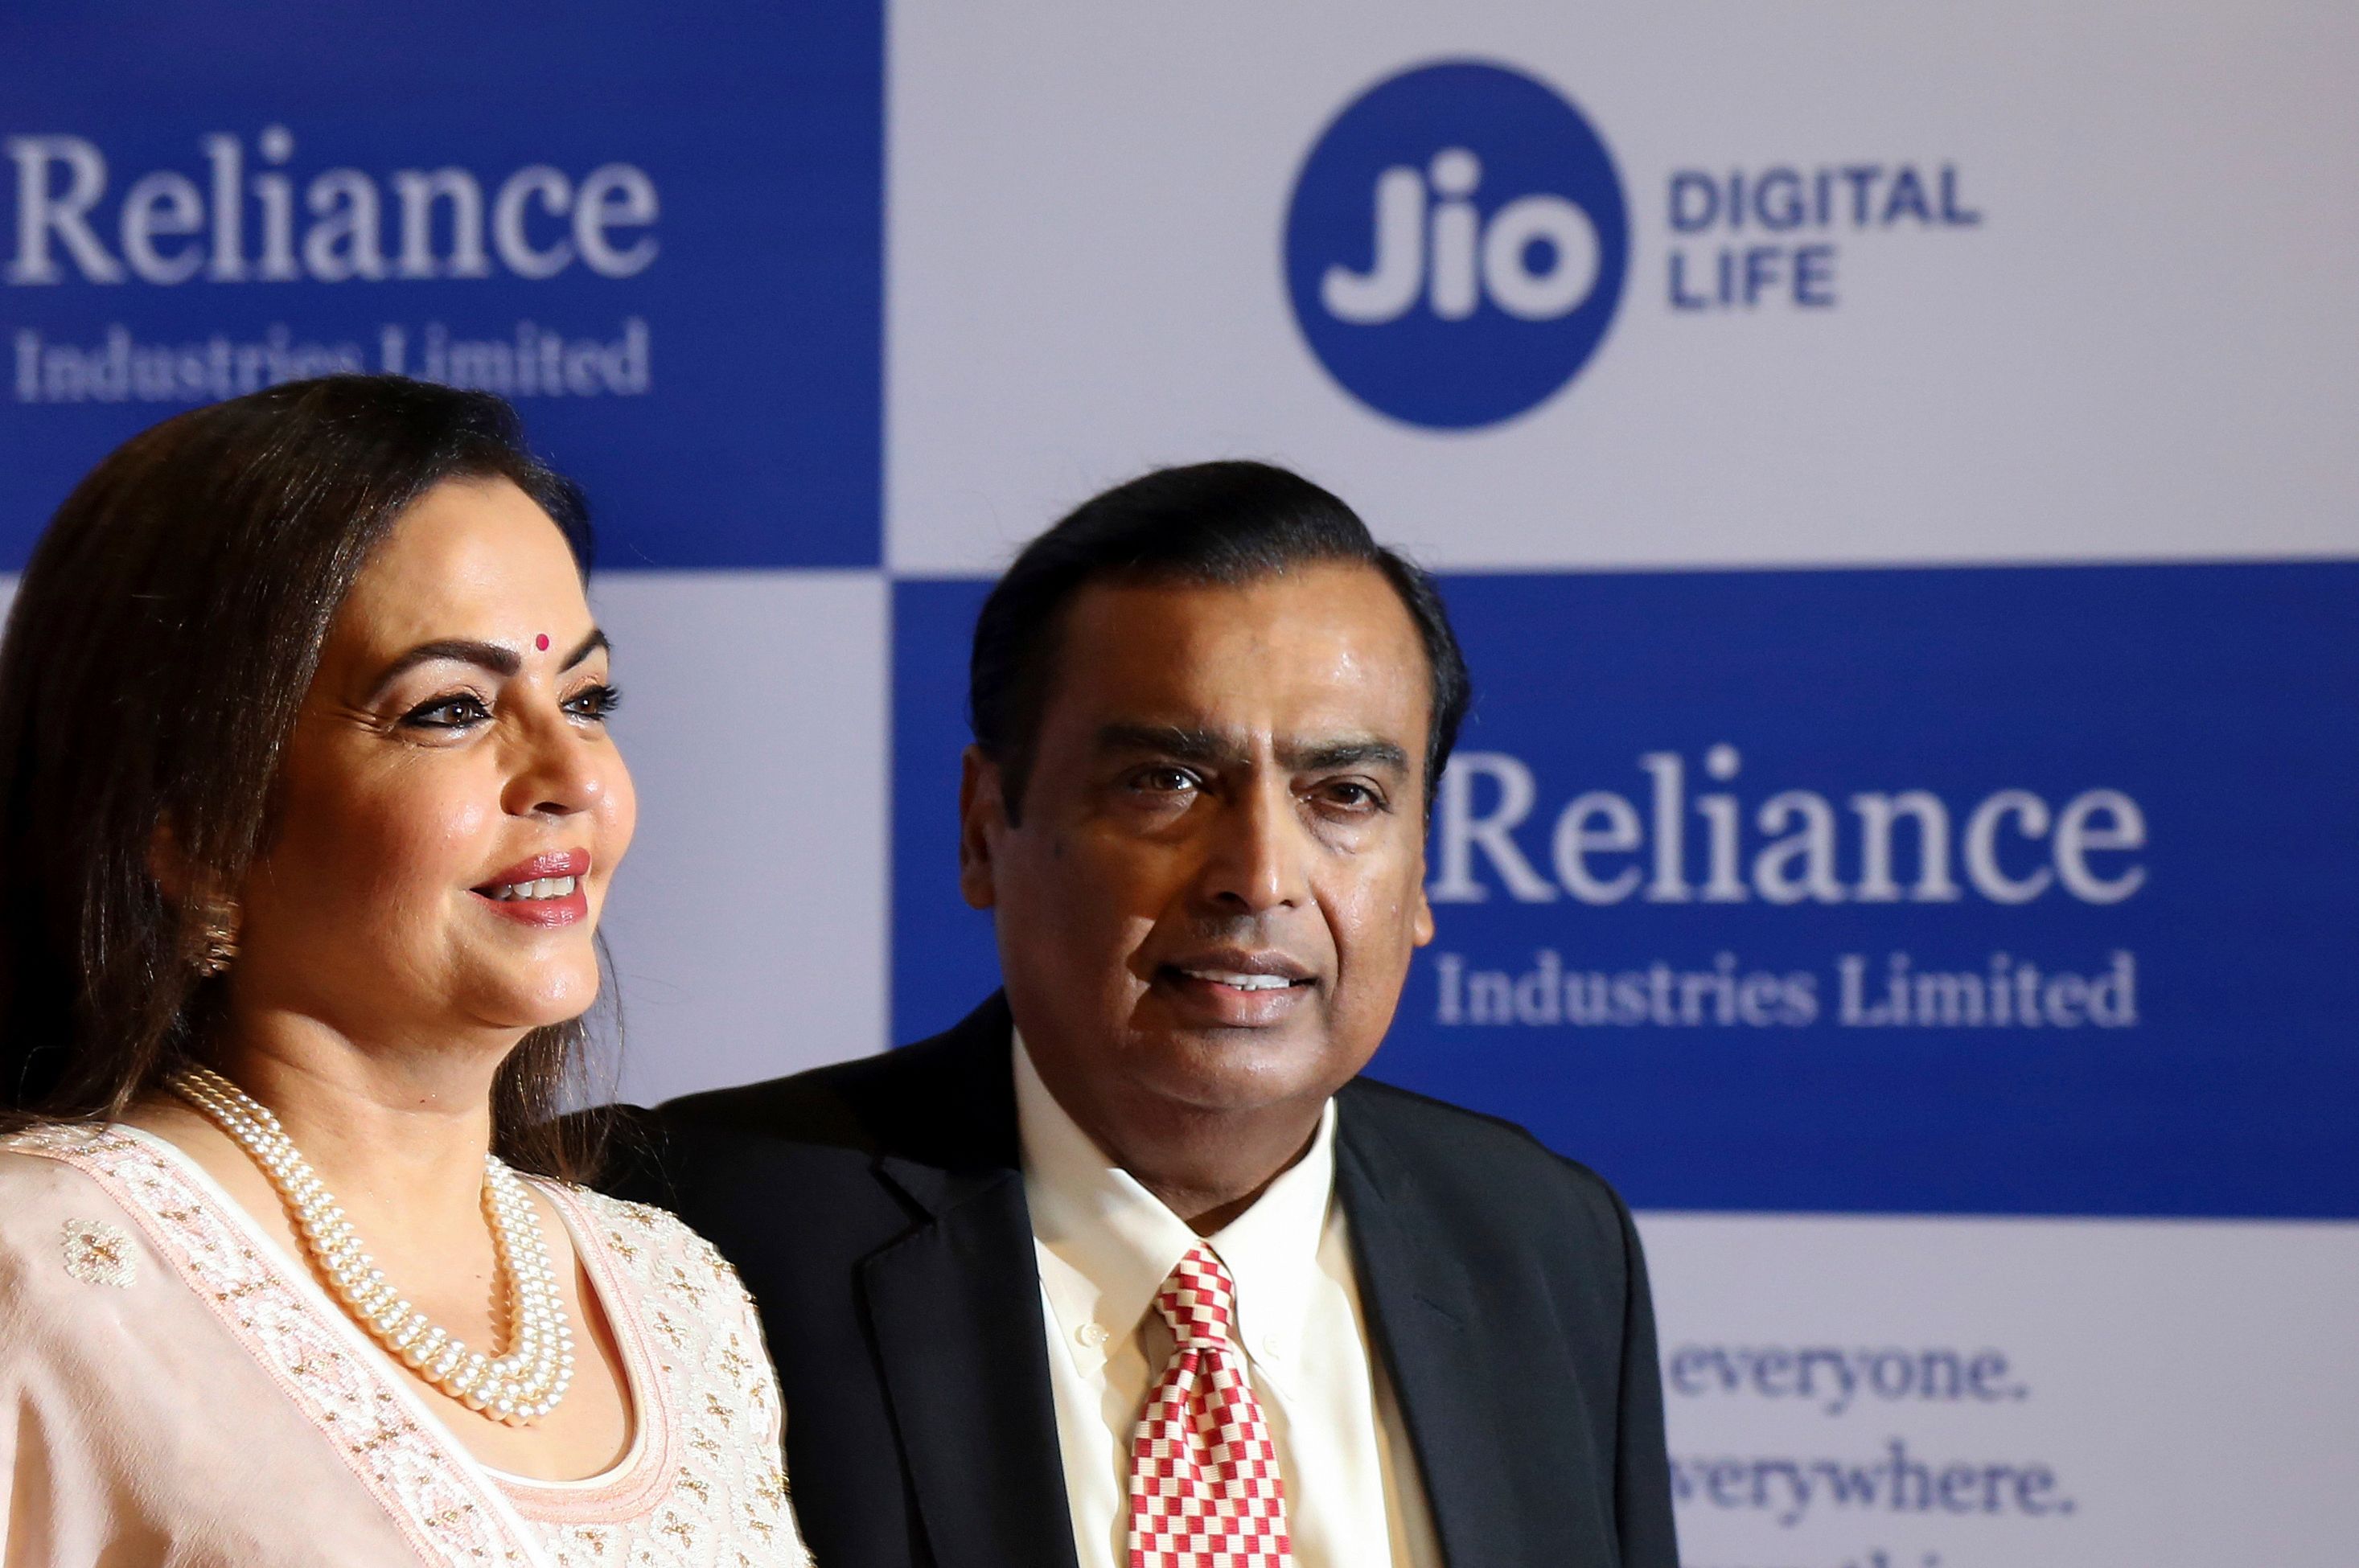 Reliance CEO Mukesh Ambani is trying to build the next global technology  giant